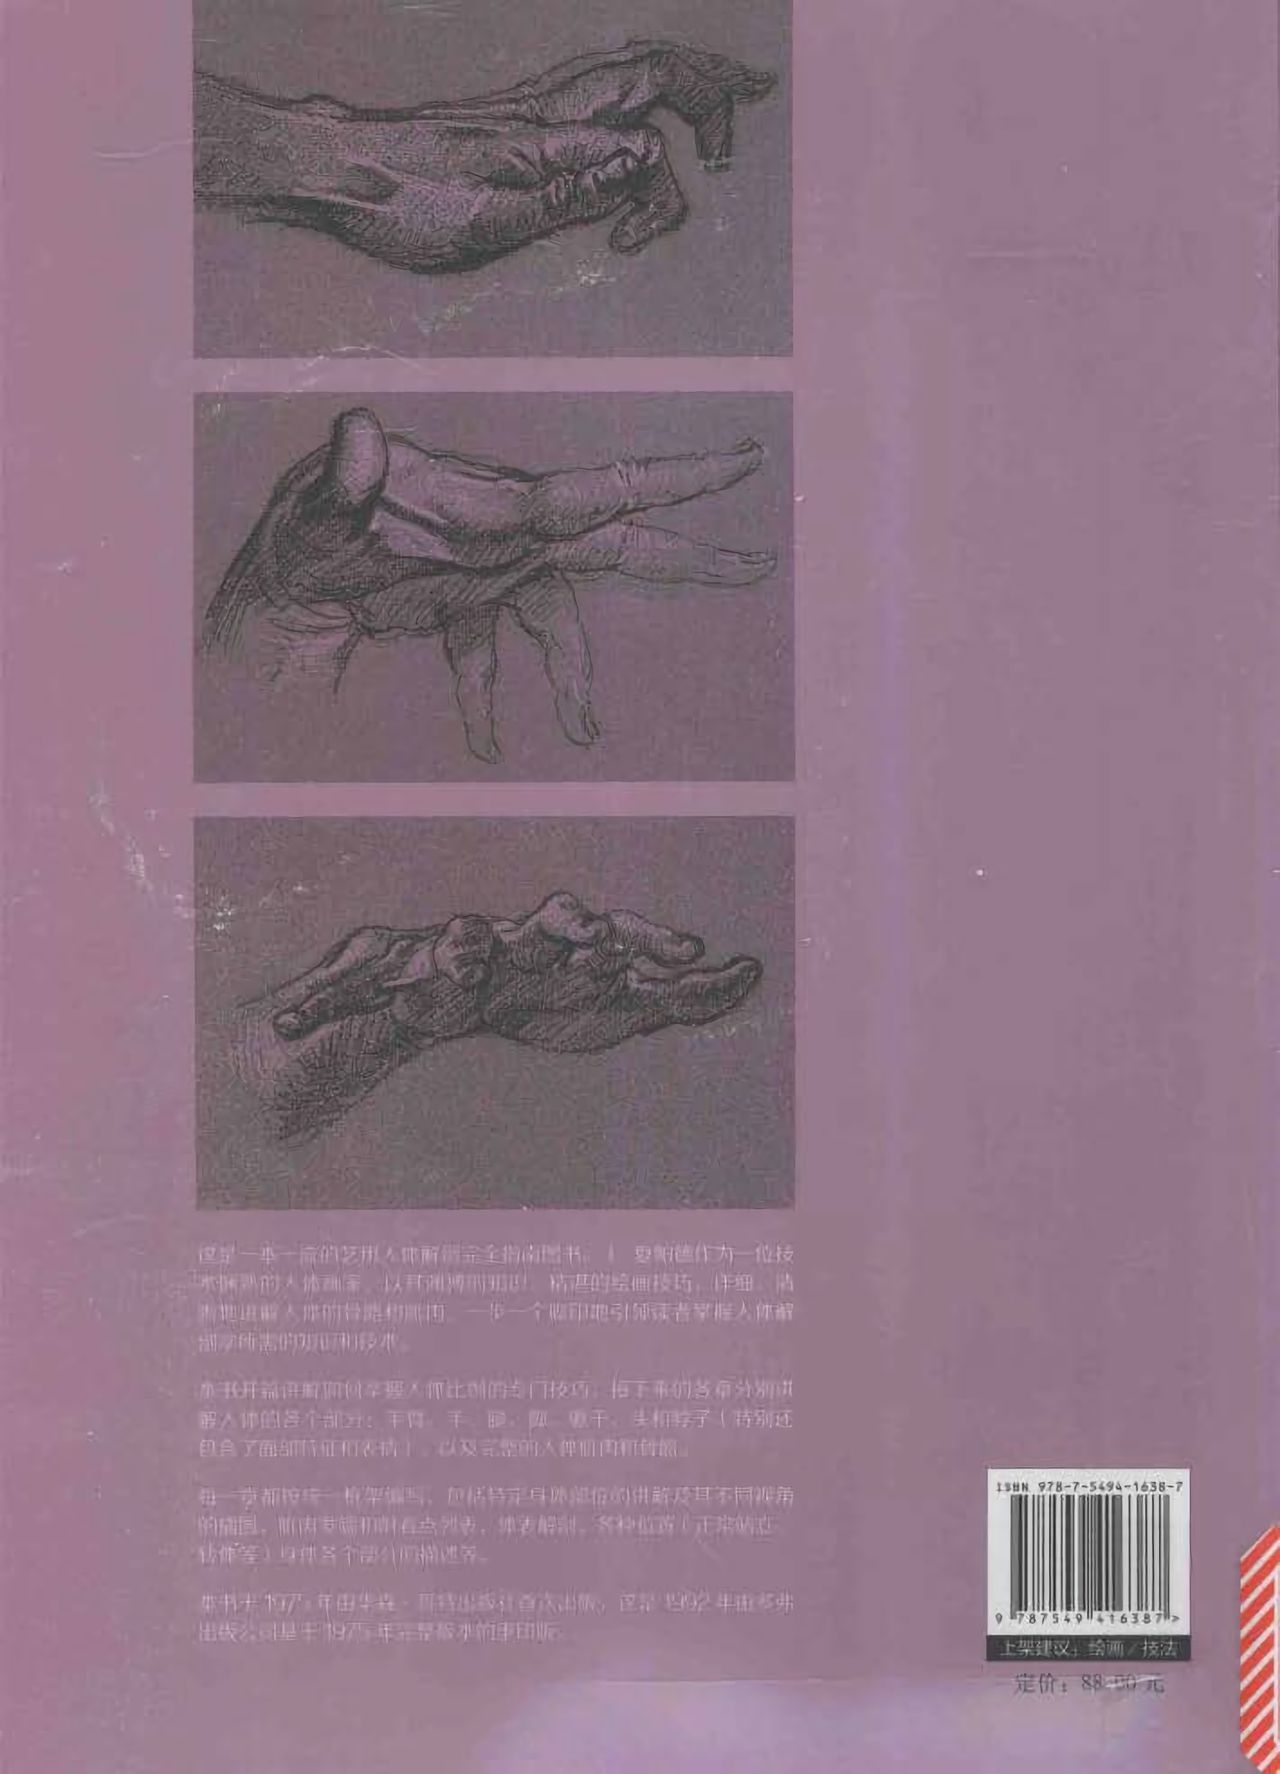 Anatomy-A Complete Guide for Artists - Joseph Sheppard [Chinese] 224